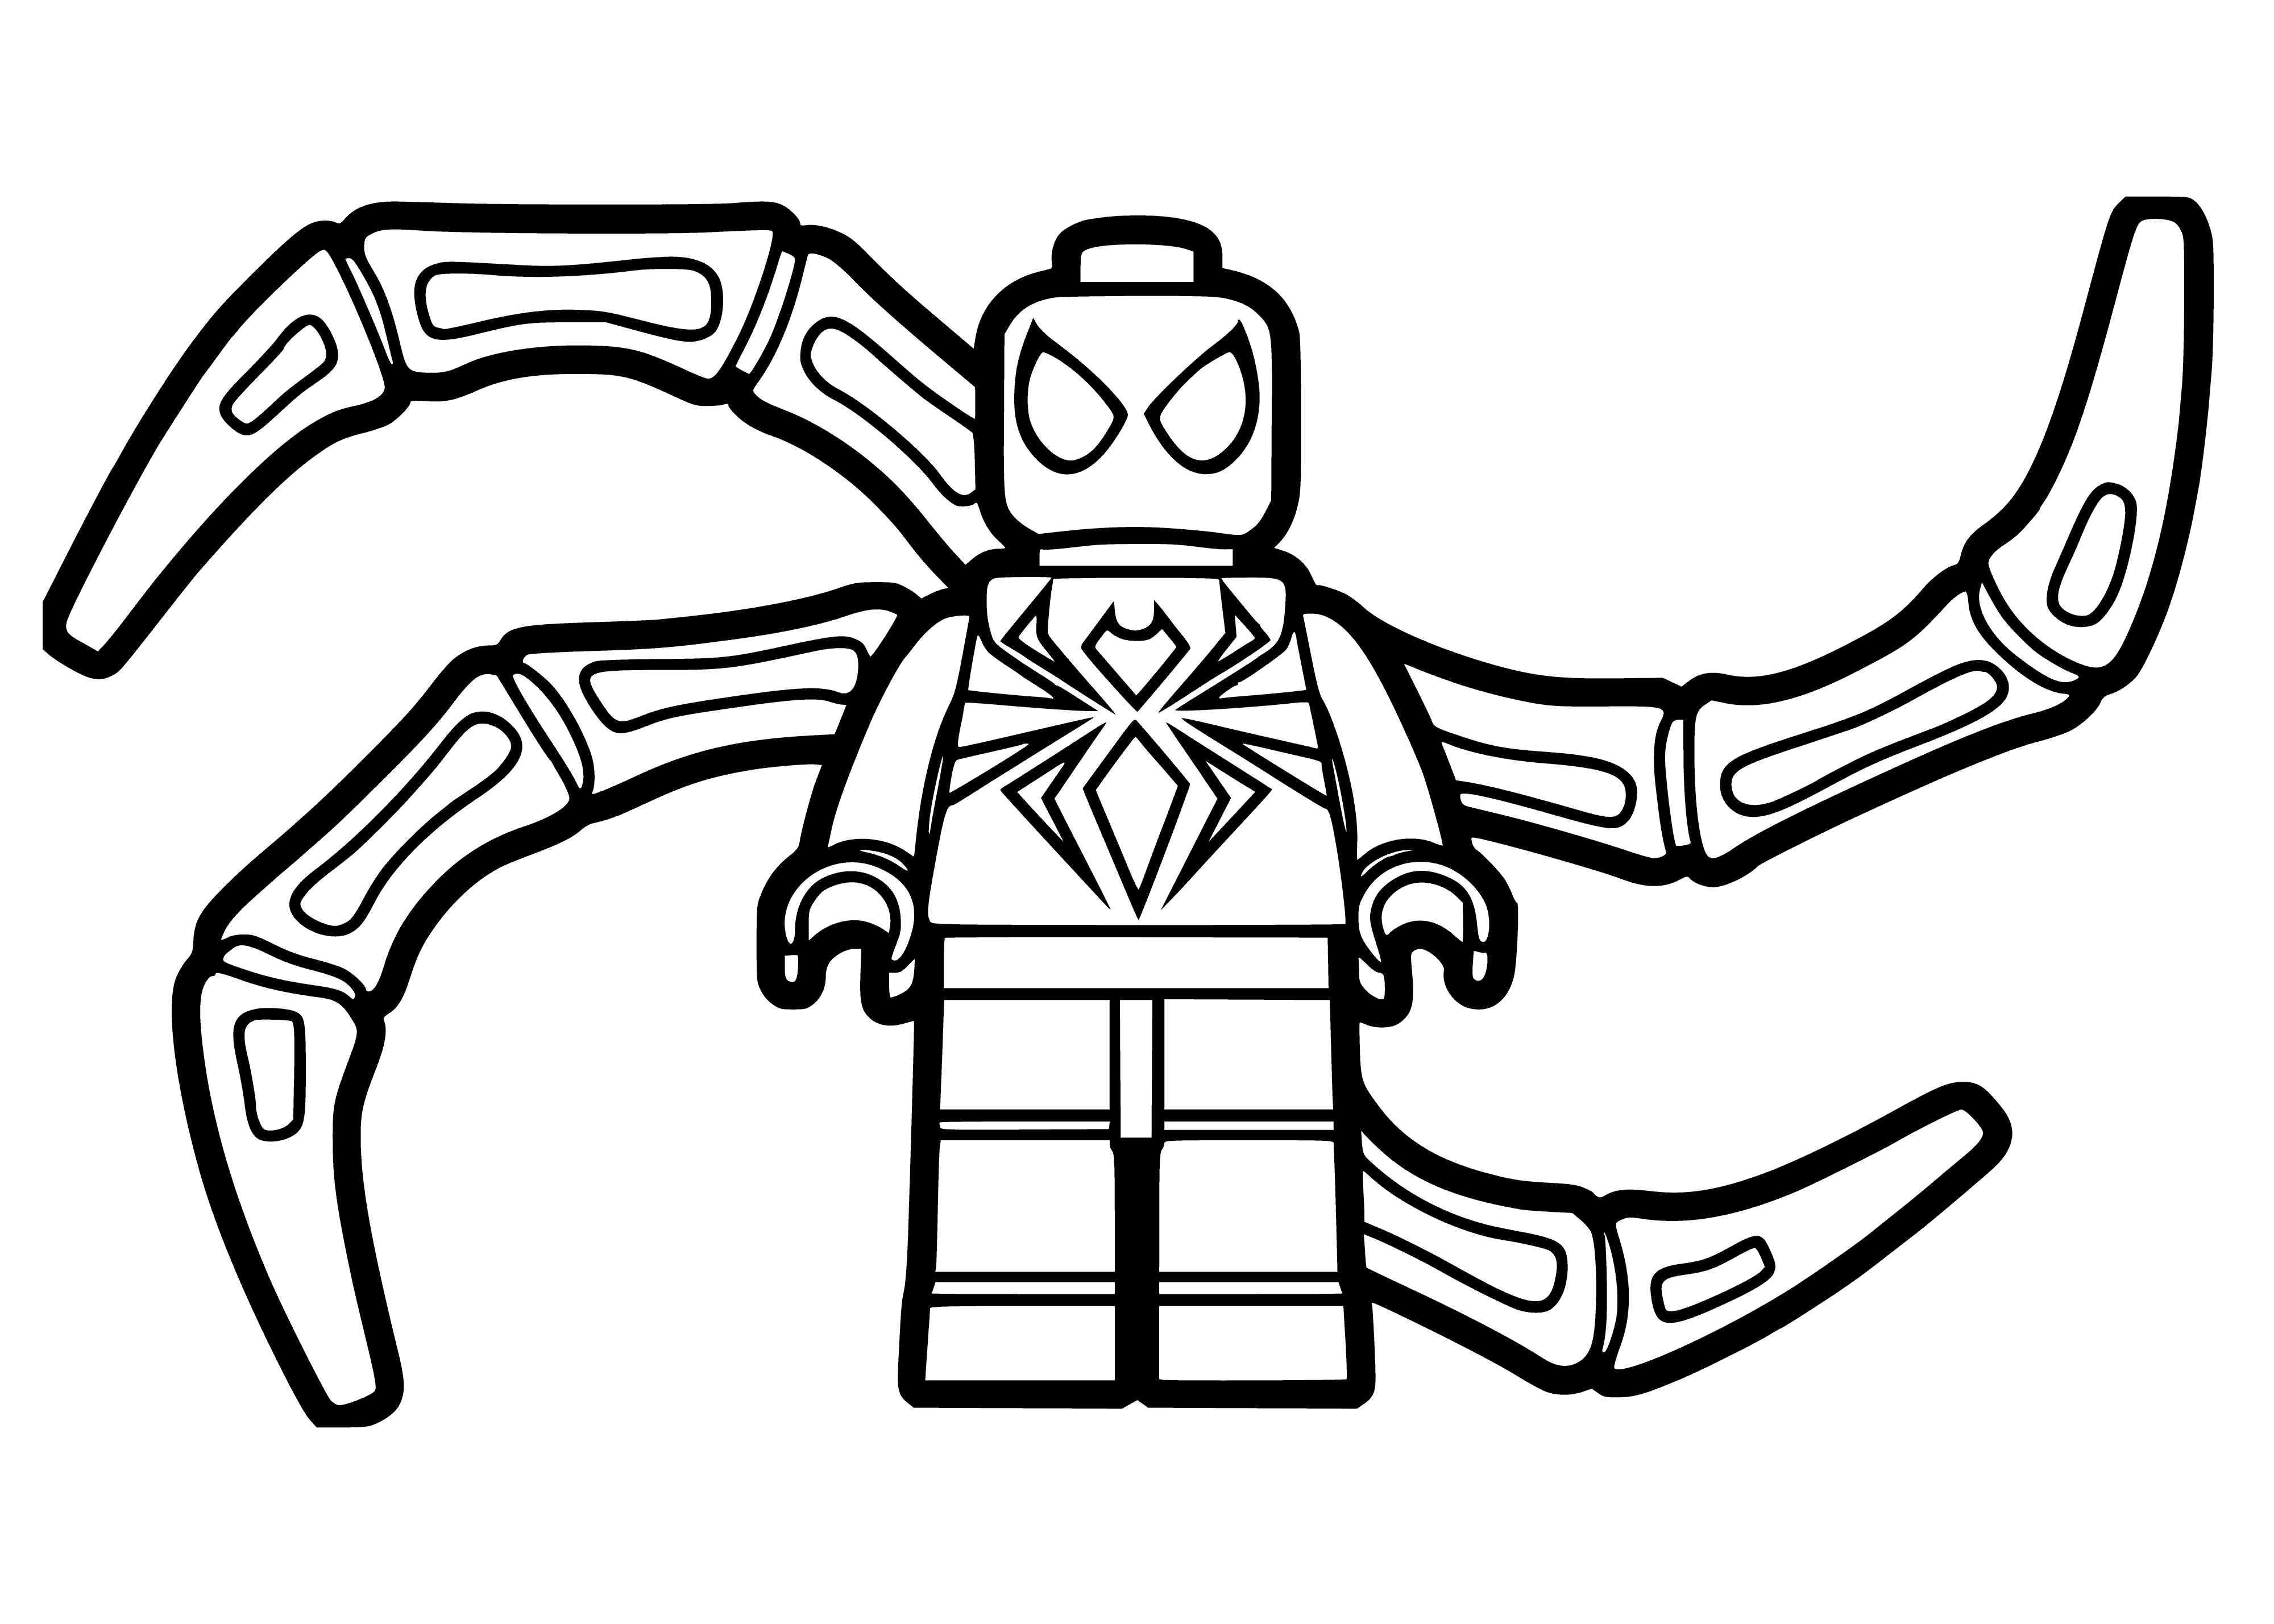 coloring page: Spiderman is a superhero fighting against evil using his web to swing between buildings.